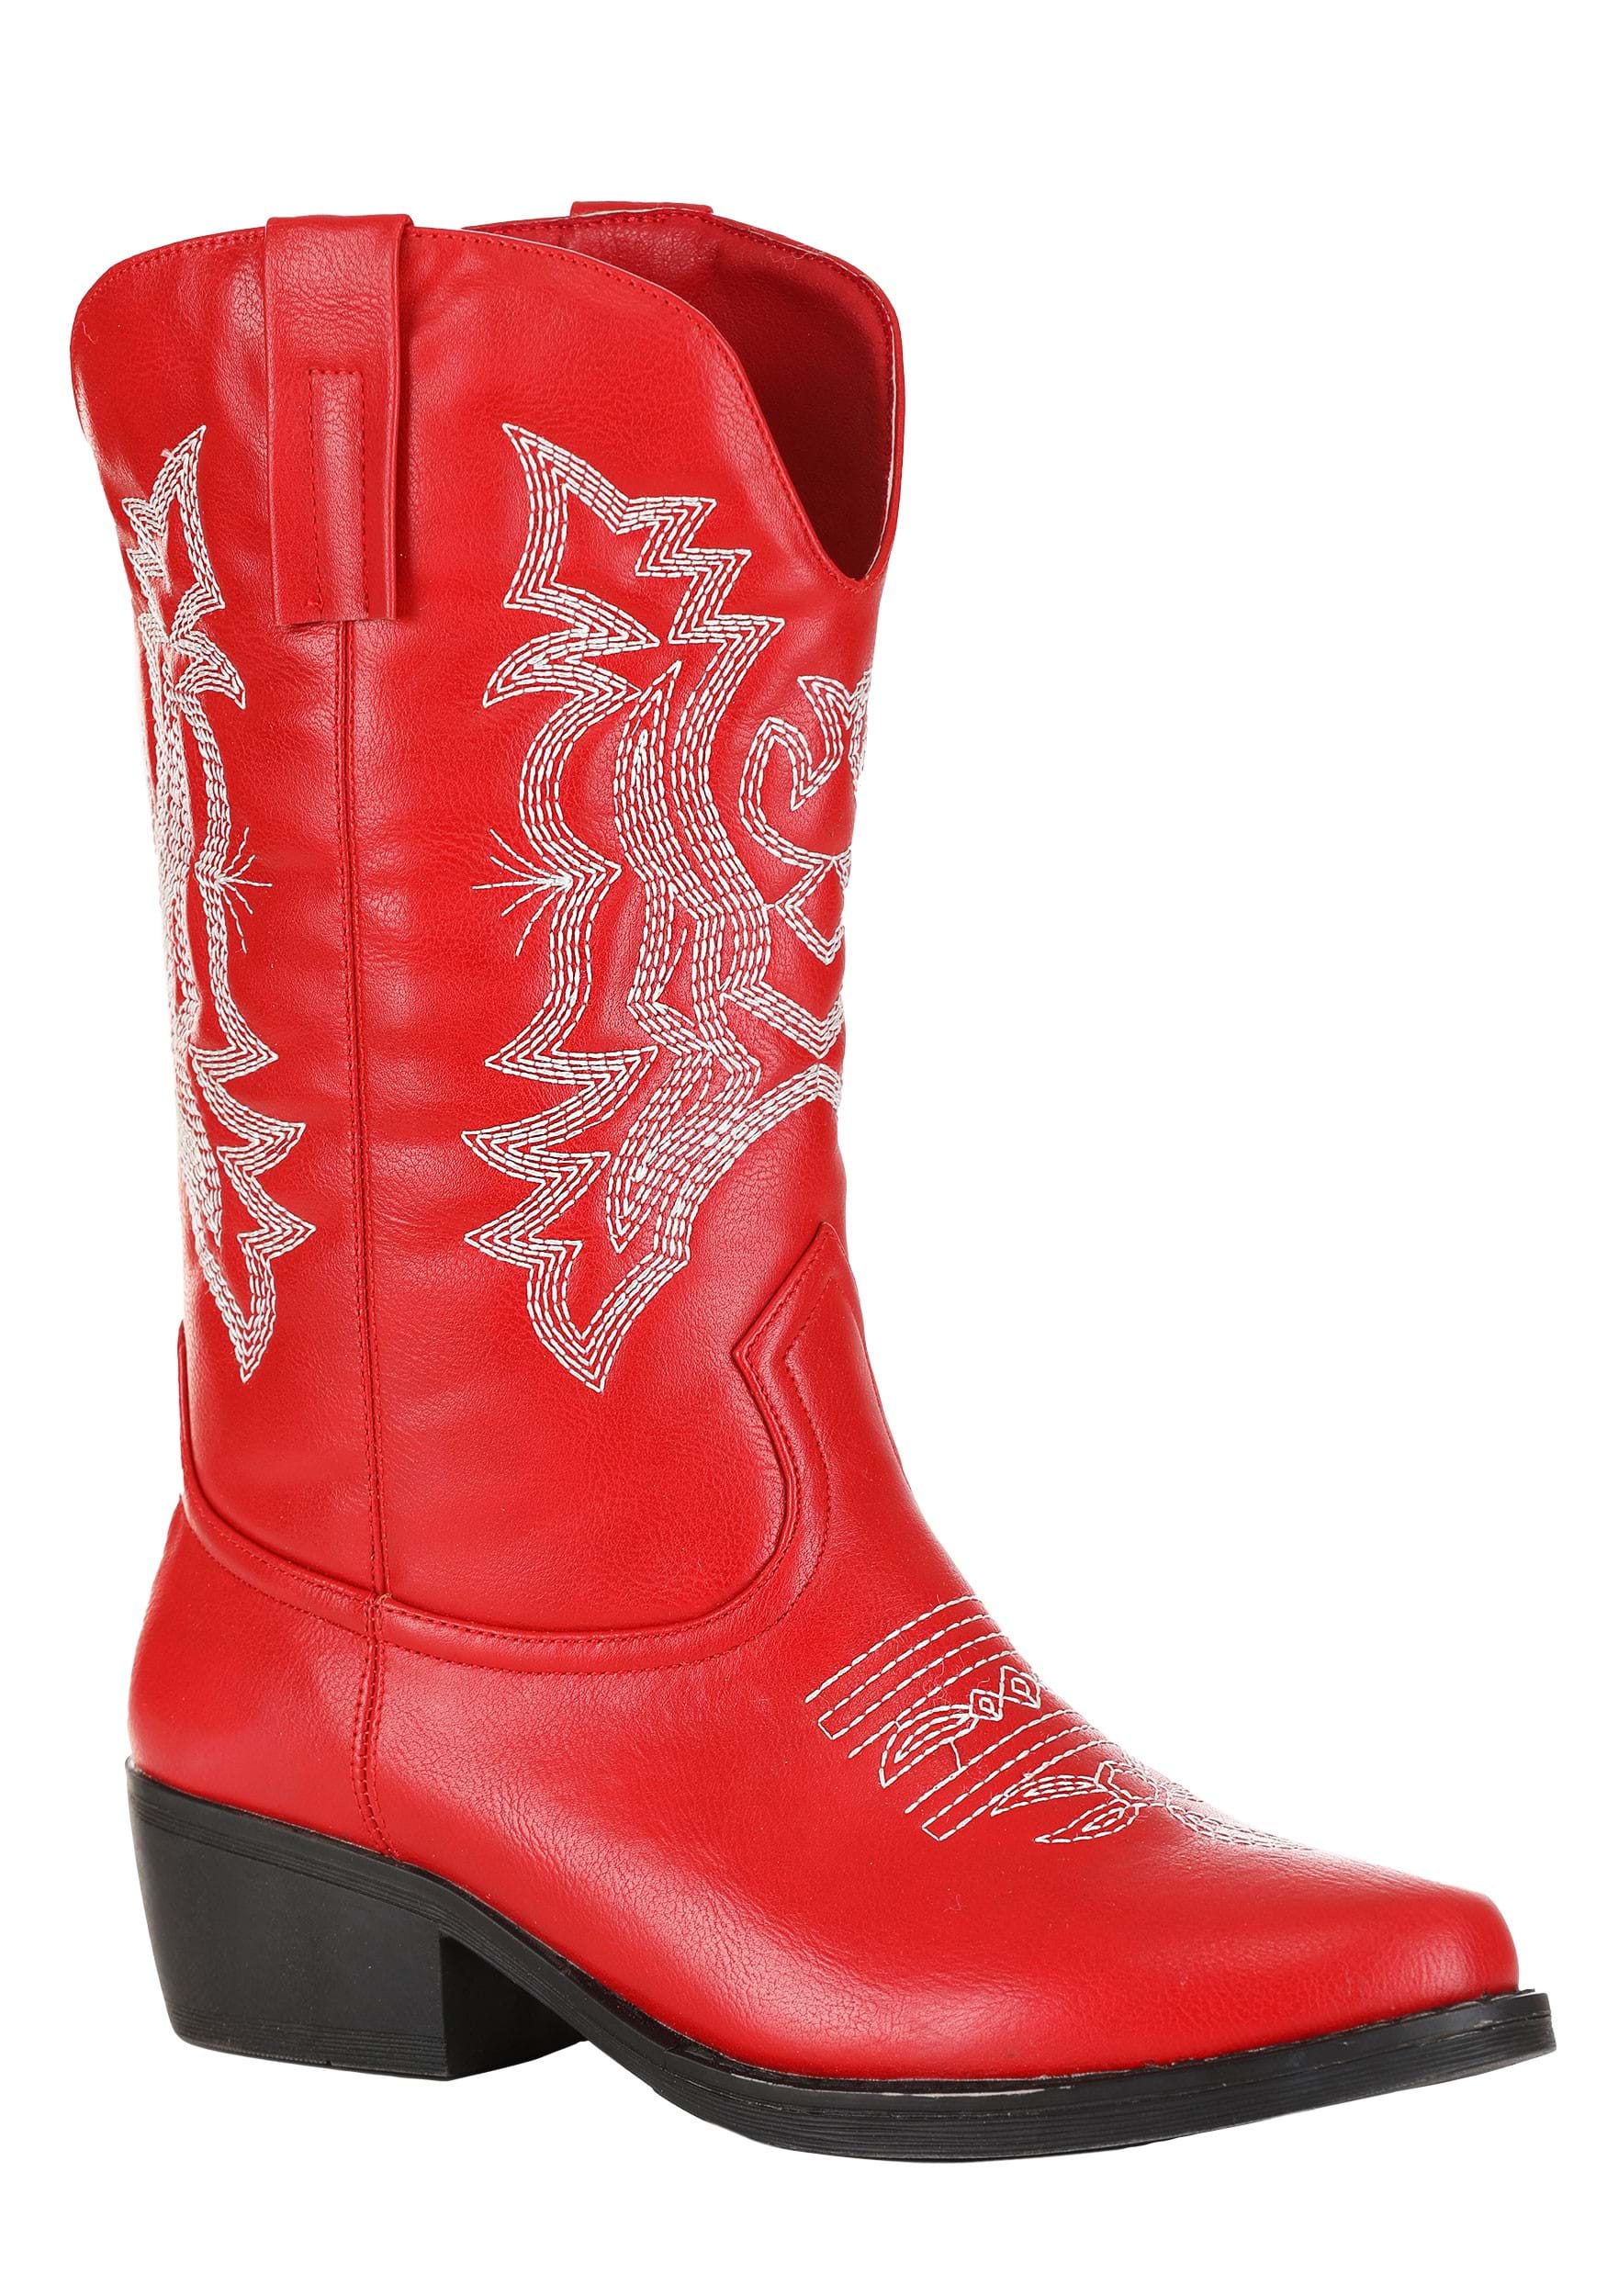 Classic Women's Red Cowgirl Boots , Fancy Dress Costume Boots